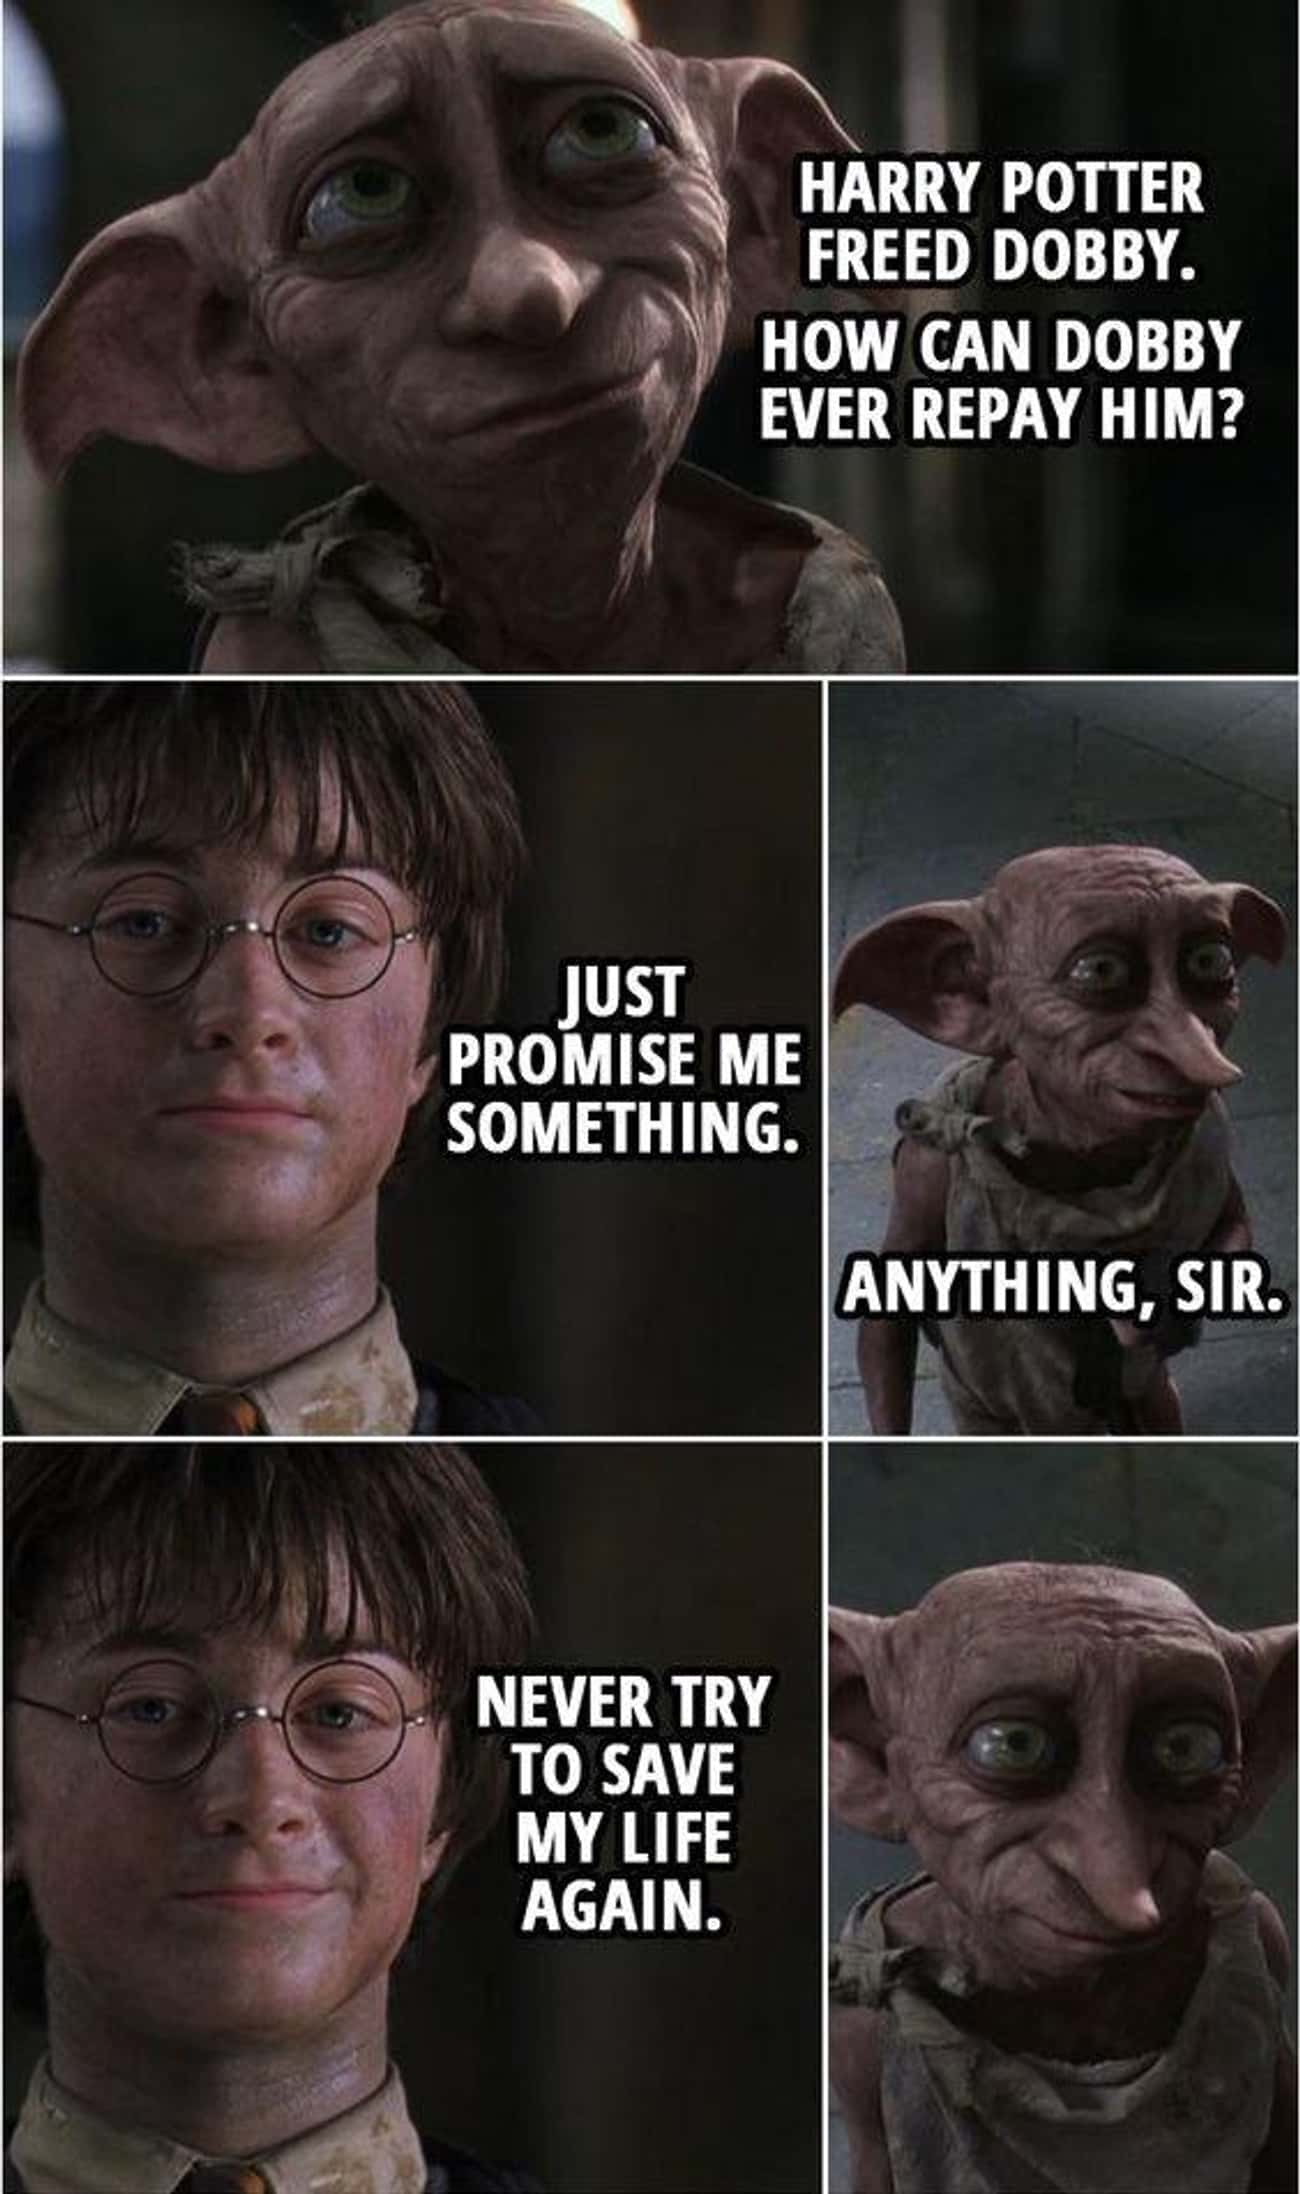 Dobby Harms Harry Whenever He Tries To Help Him